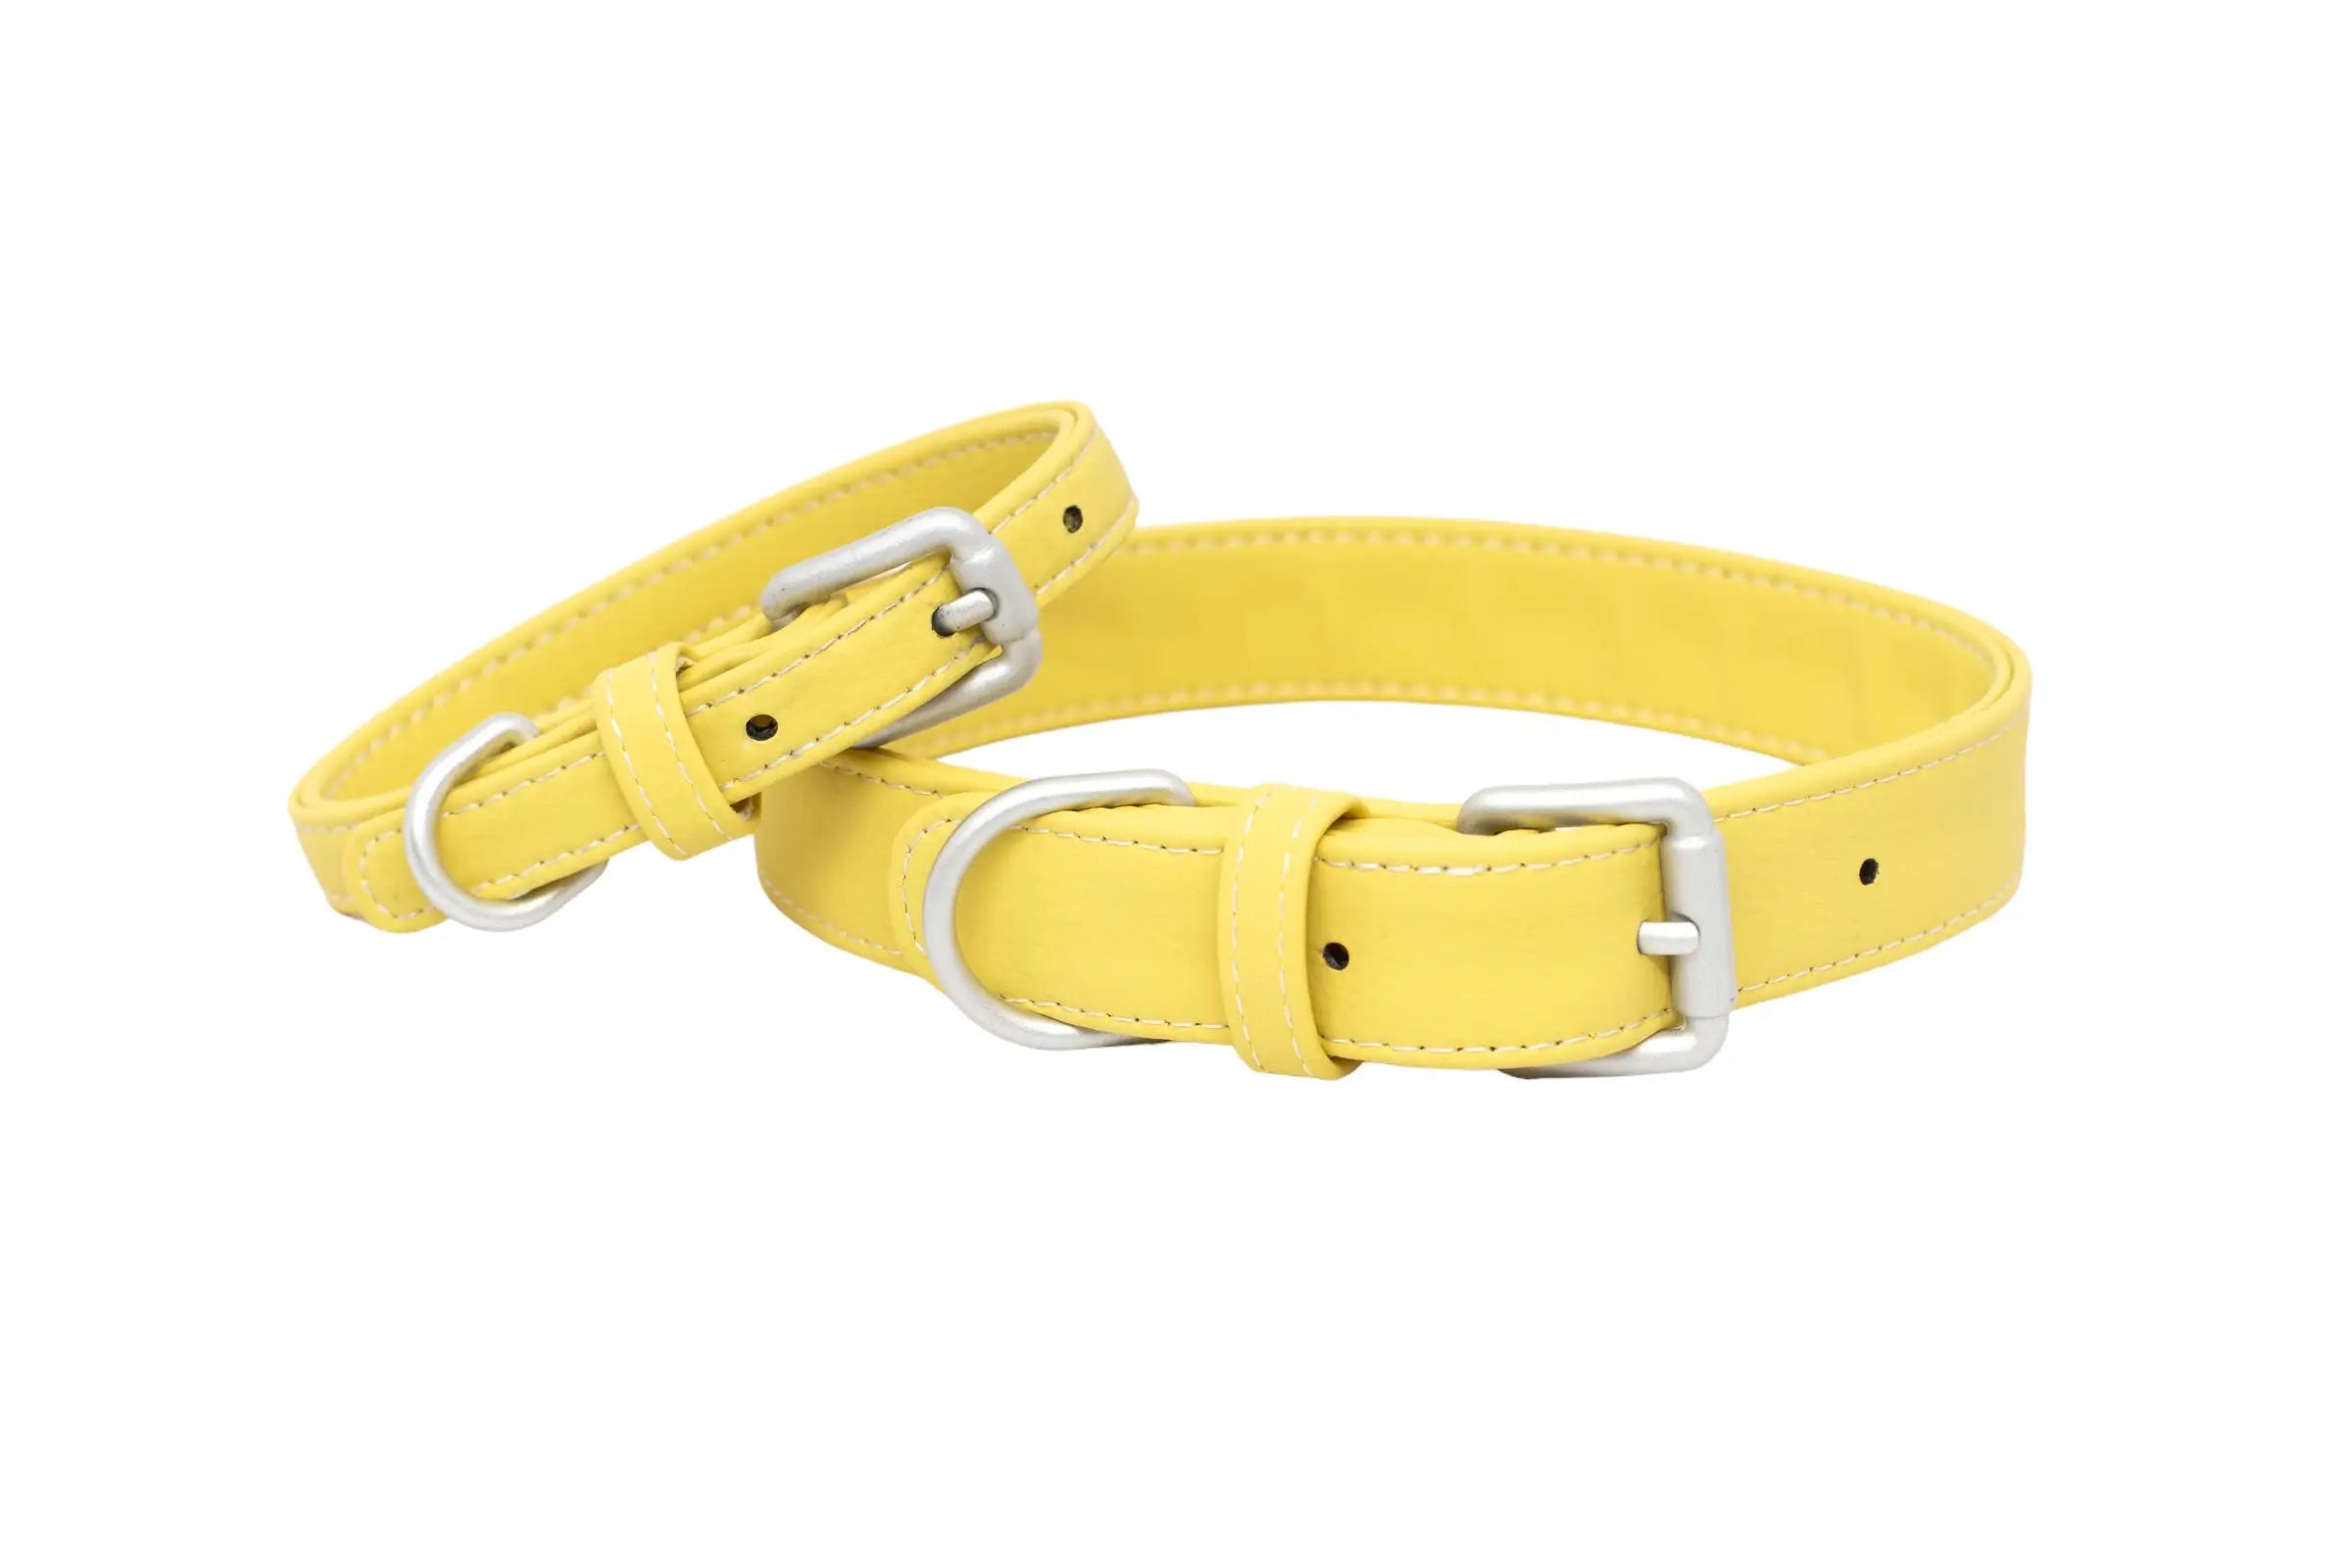 Front of two waterproof and durable dog collars with vegan leather and marine grade anodized aluminum hardware in the color honey yellow.